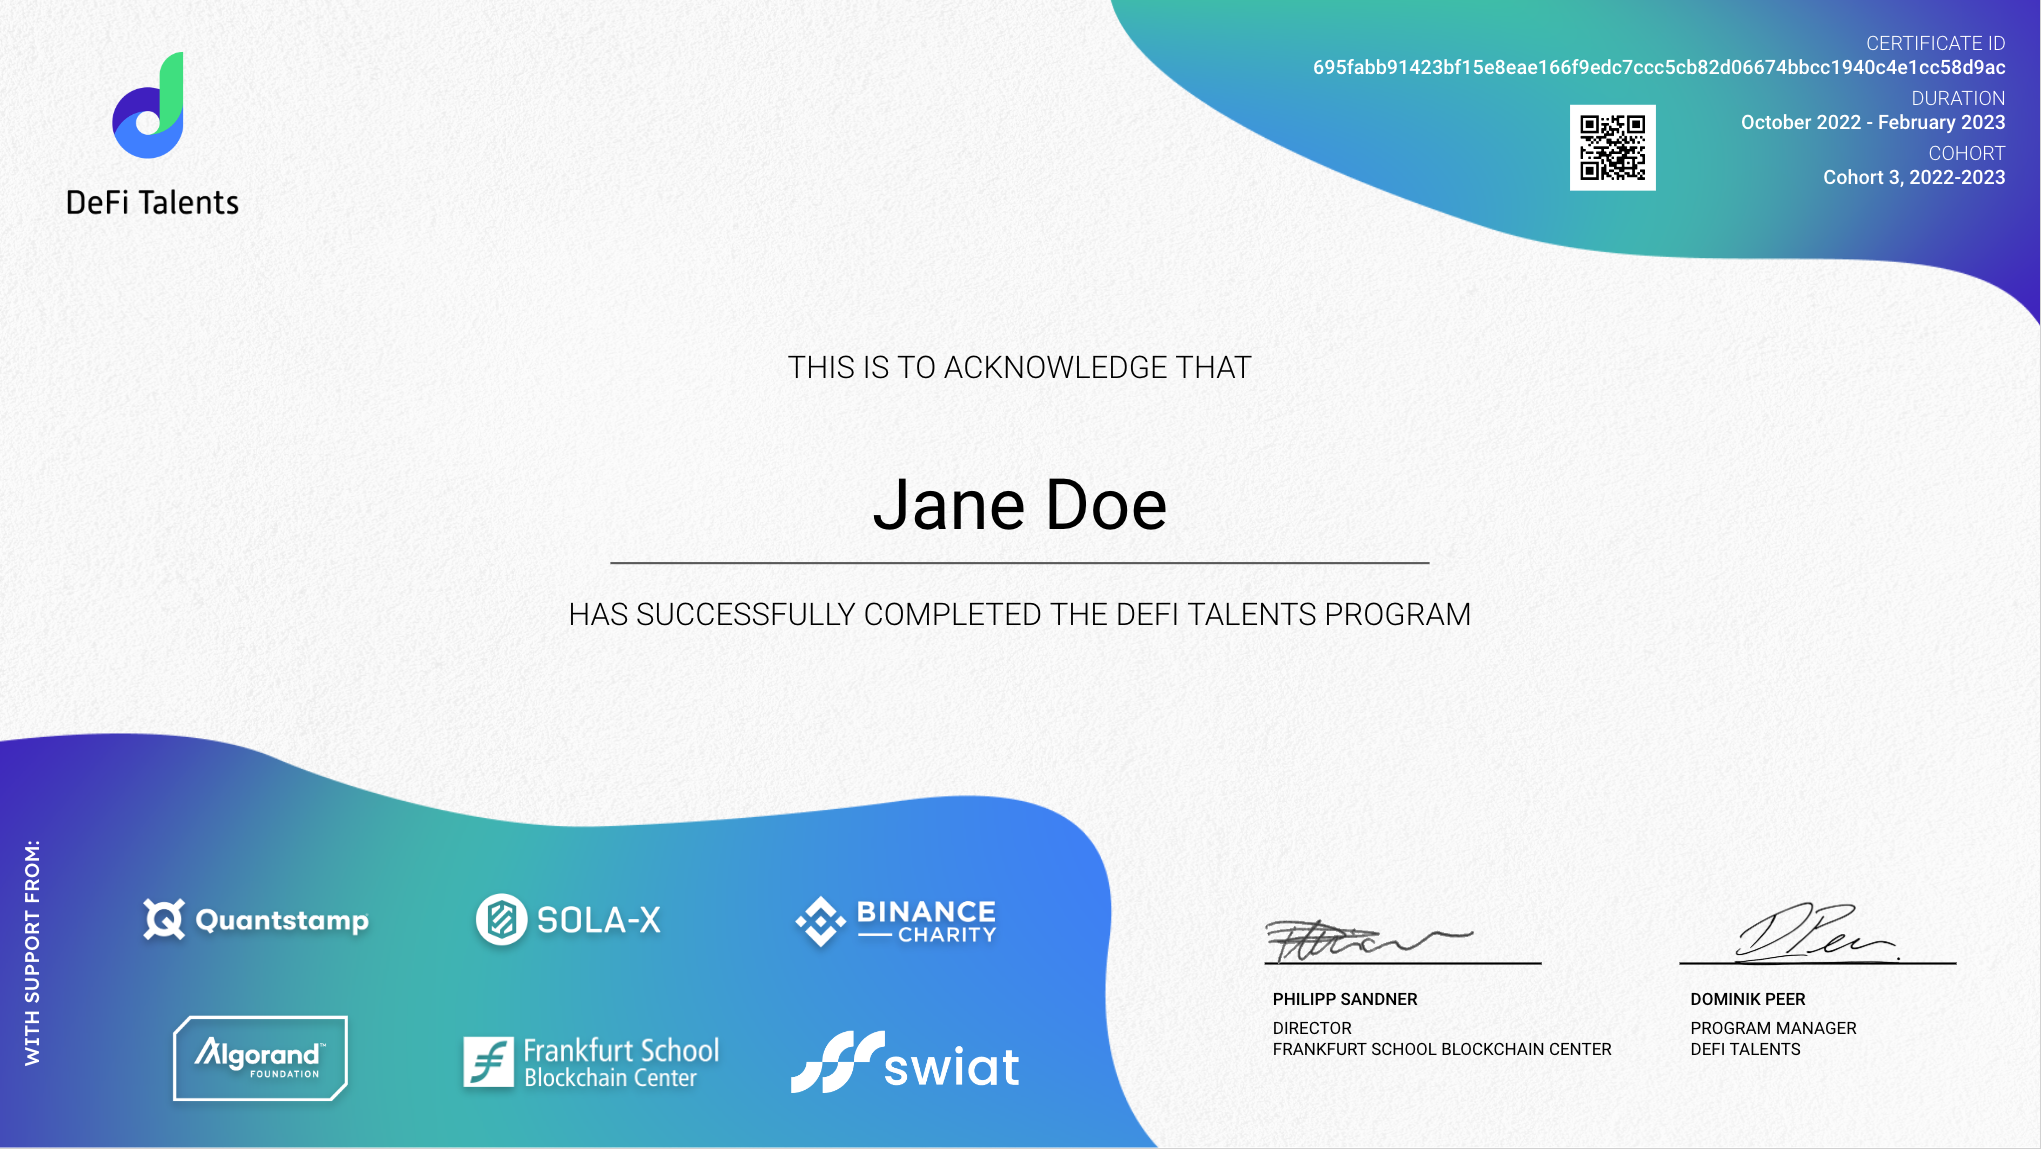 Example certificate of a DeFi talent